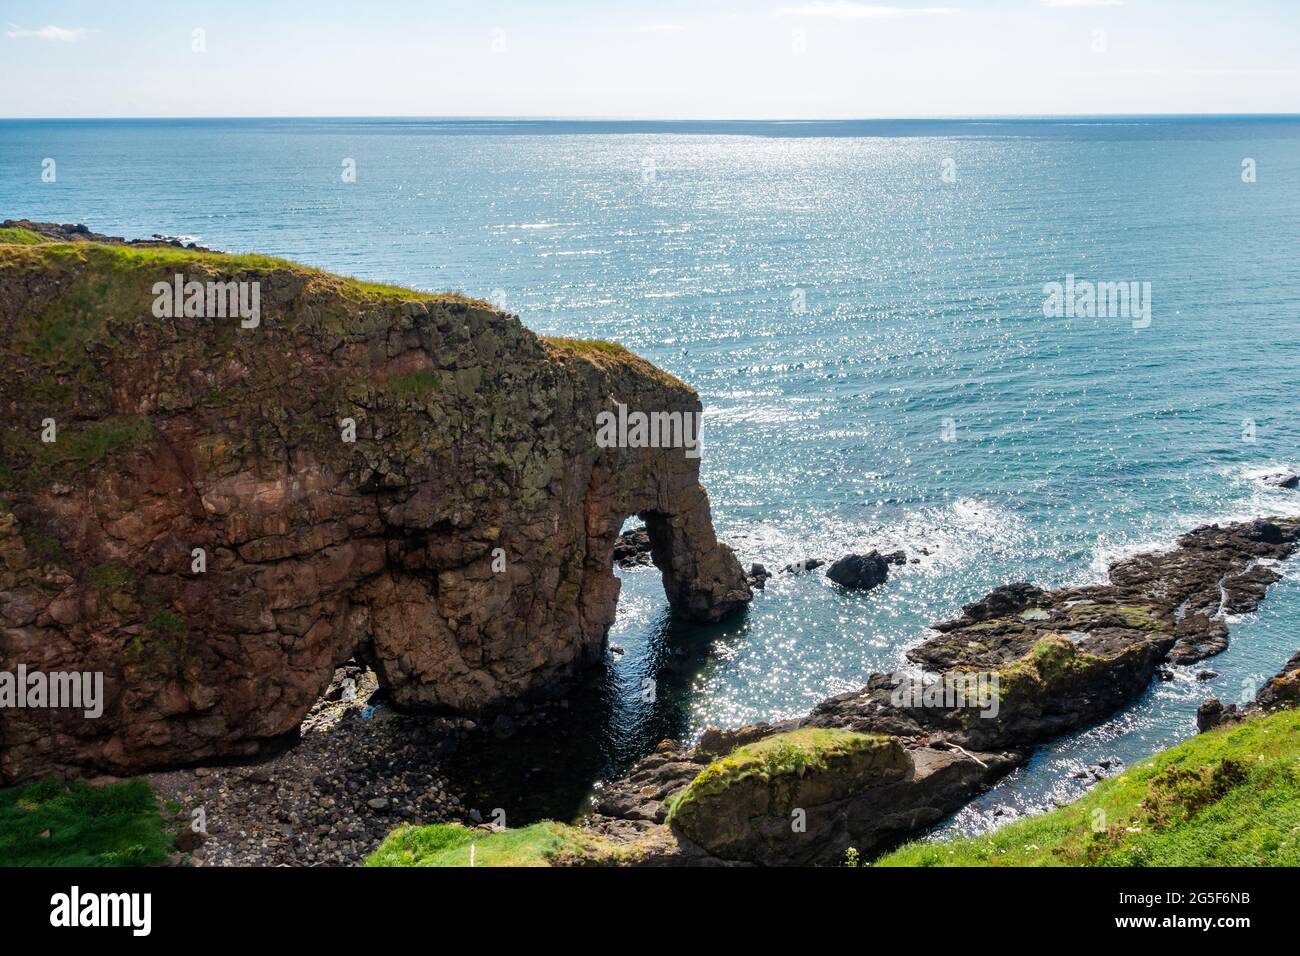 The unusual cliff formation known as Elephant Rock near Montrose, Scotland Stock Photo